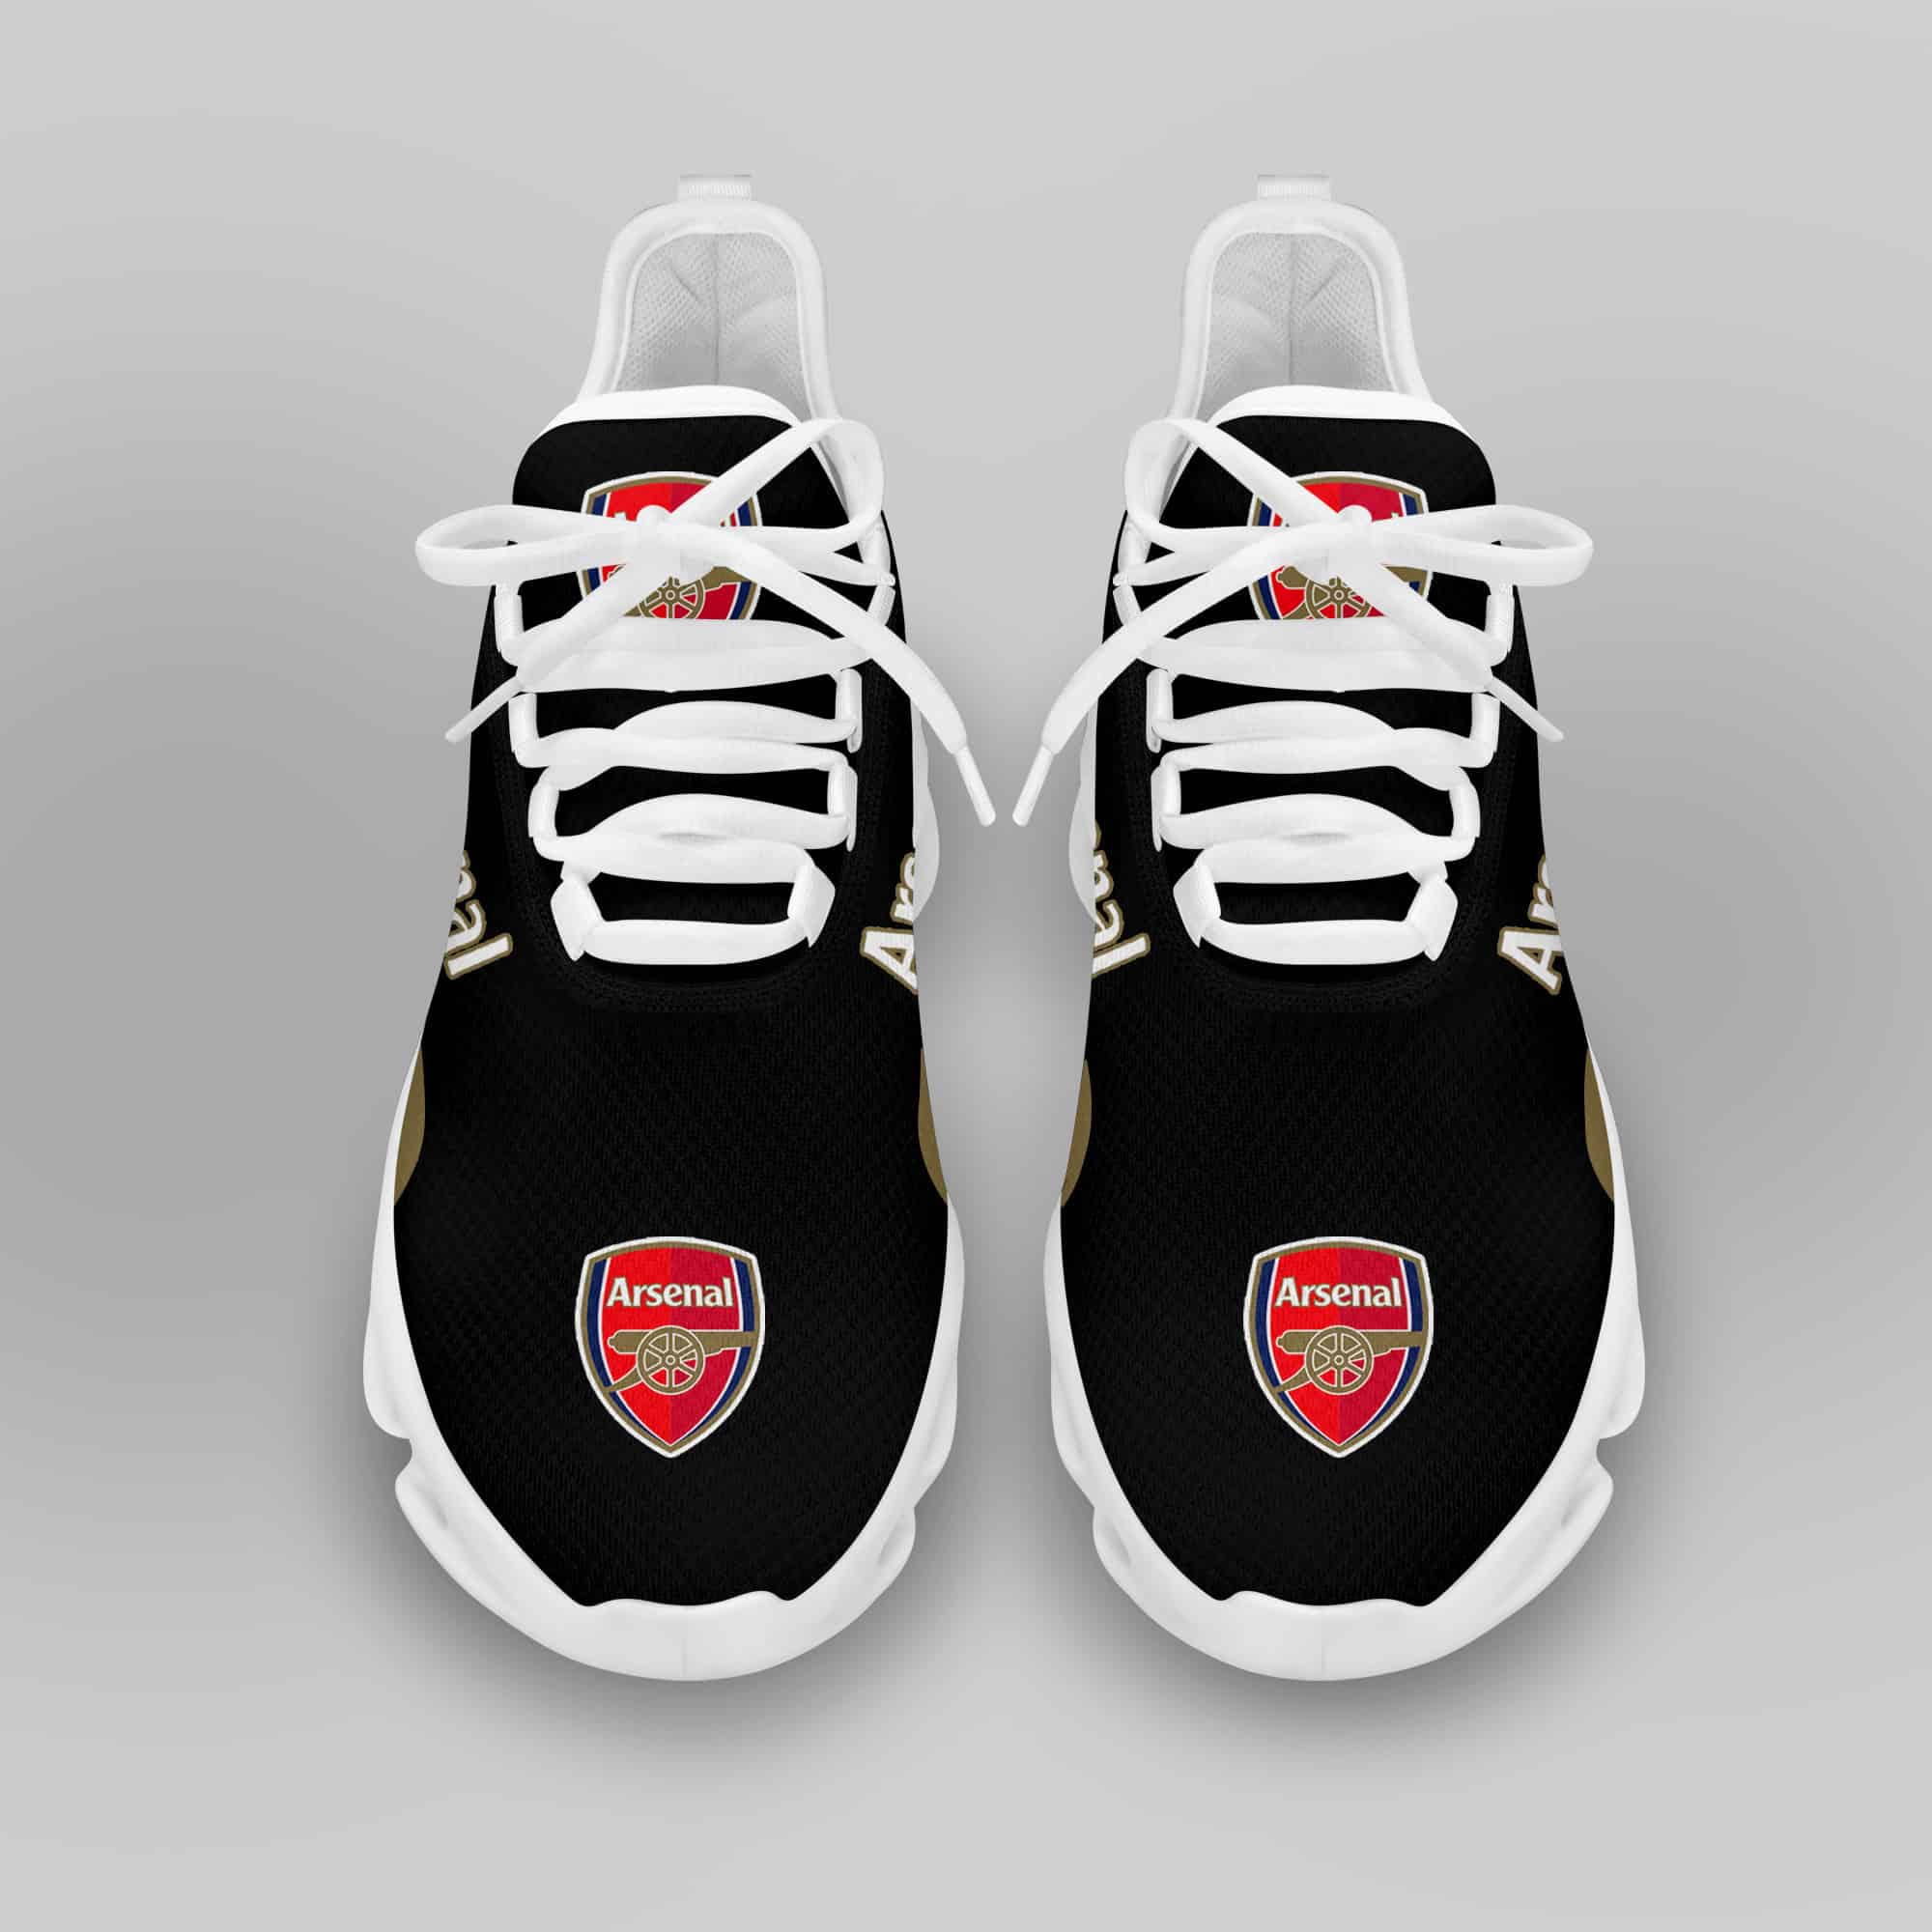 Arsenal Running Shoes Max Soul Shoes Sneakers Ver 3 3